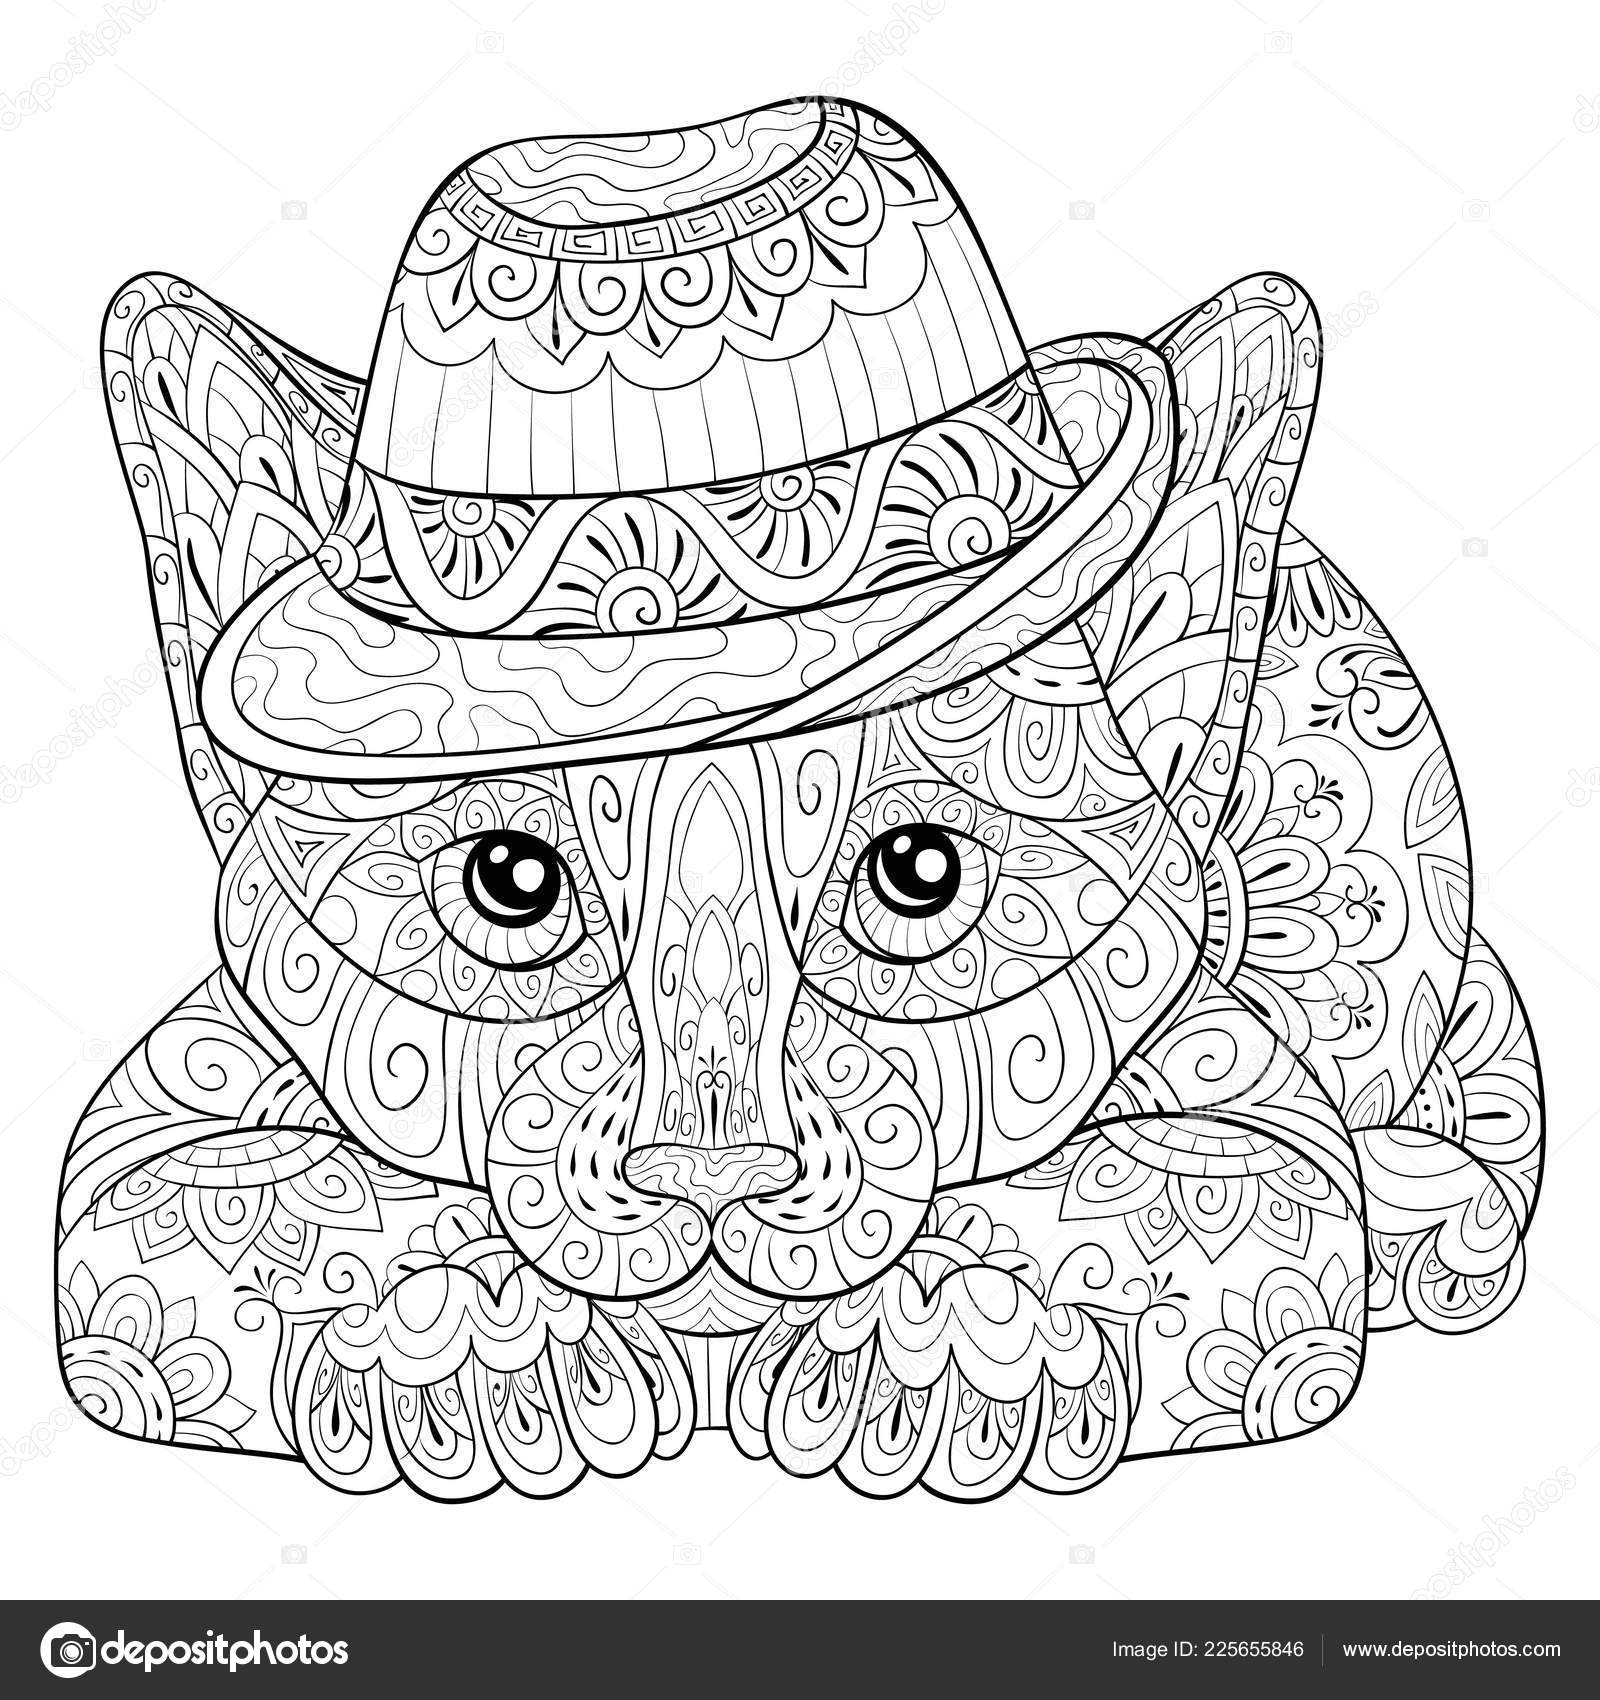 Adult coloring bookpage a cute cat Royalty Free Vector Image